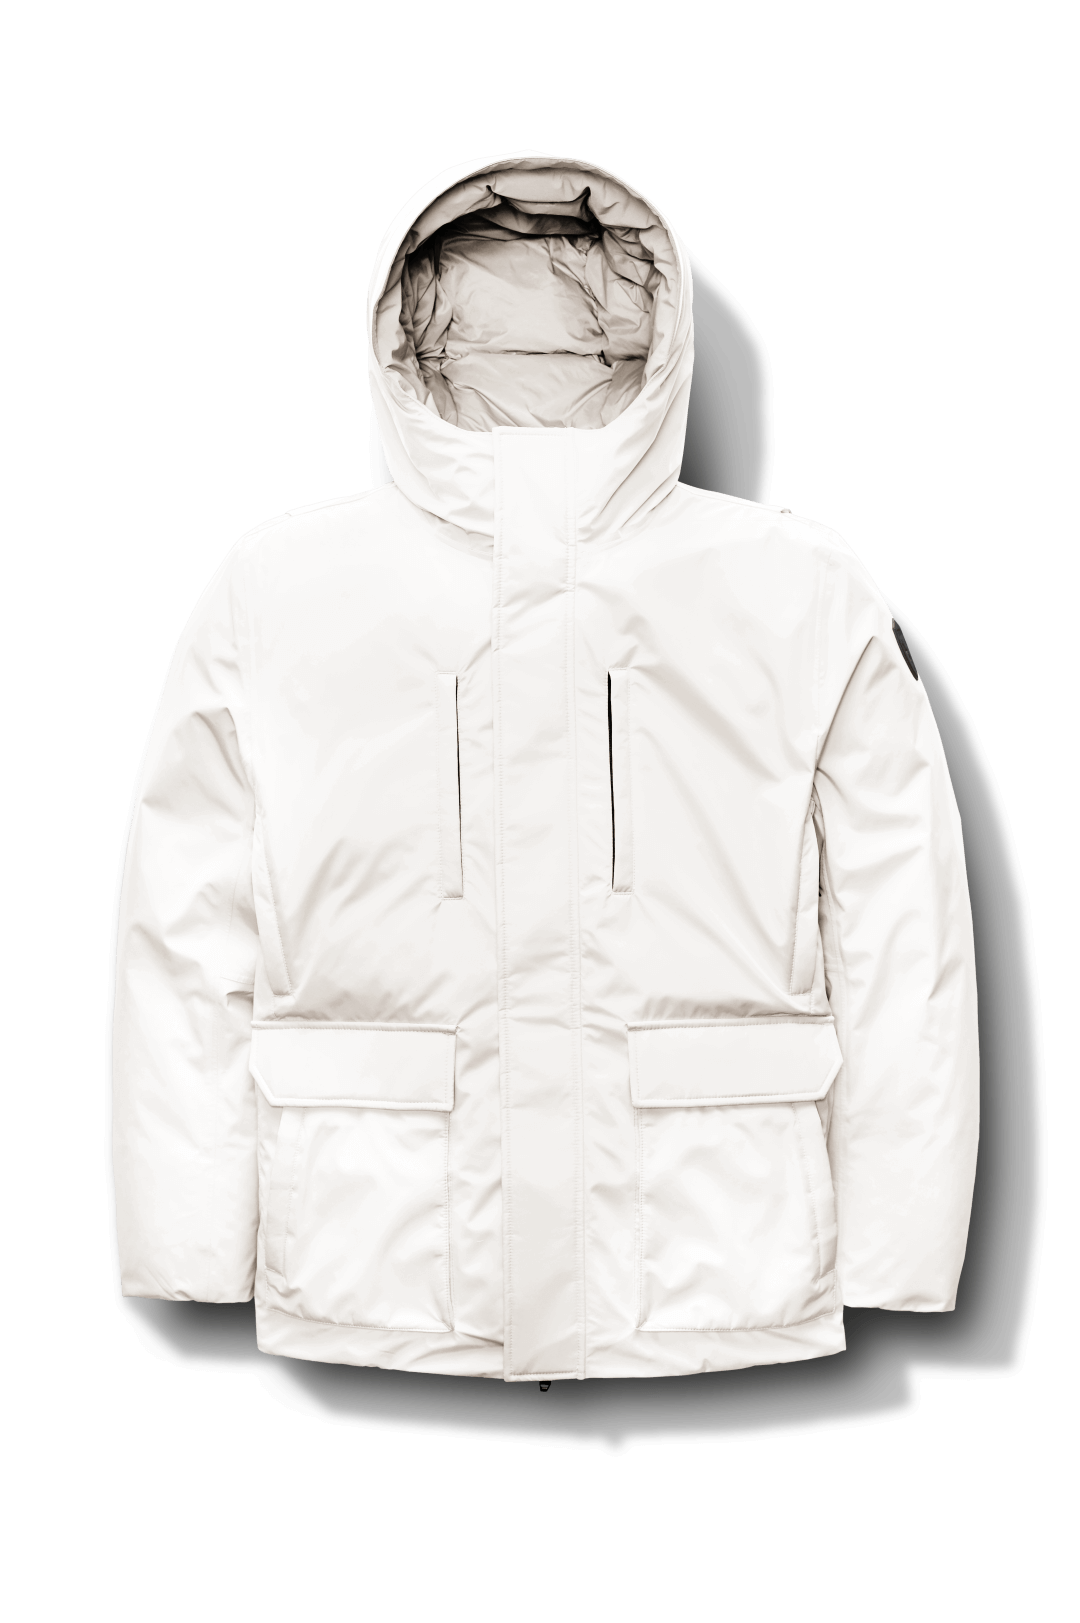 Geo Men's Short Parka in hip length, Canadian duck down insulation, non-removable hood, and two-way zipper, in Wheat